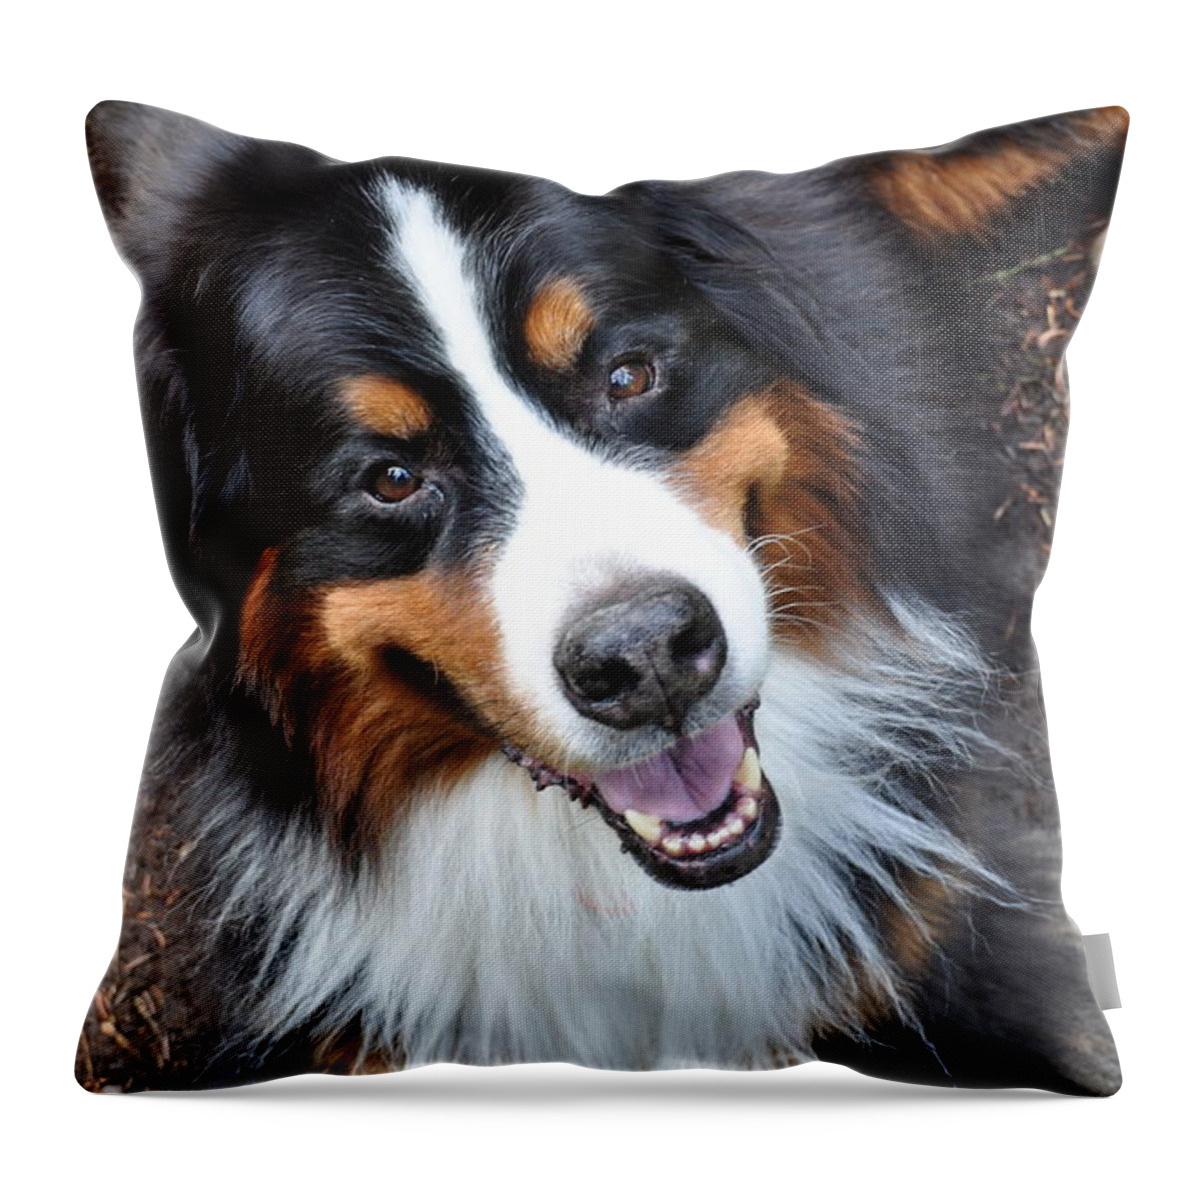 Outside Throw Pillow featuring the photograph Smiling Bernese Mountain Dog by Pelo Blanco Photo